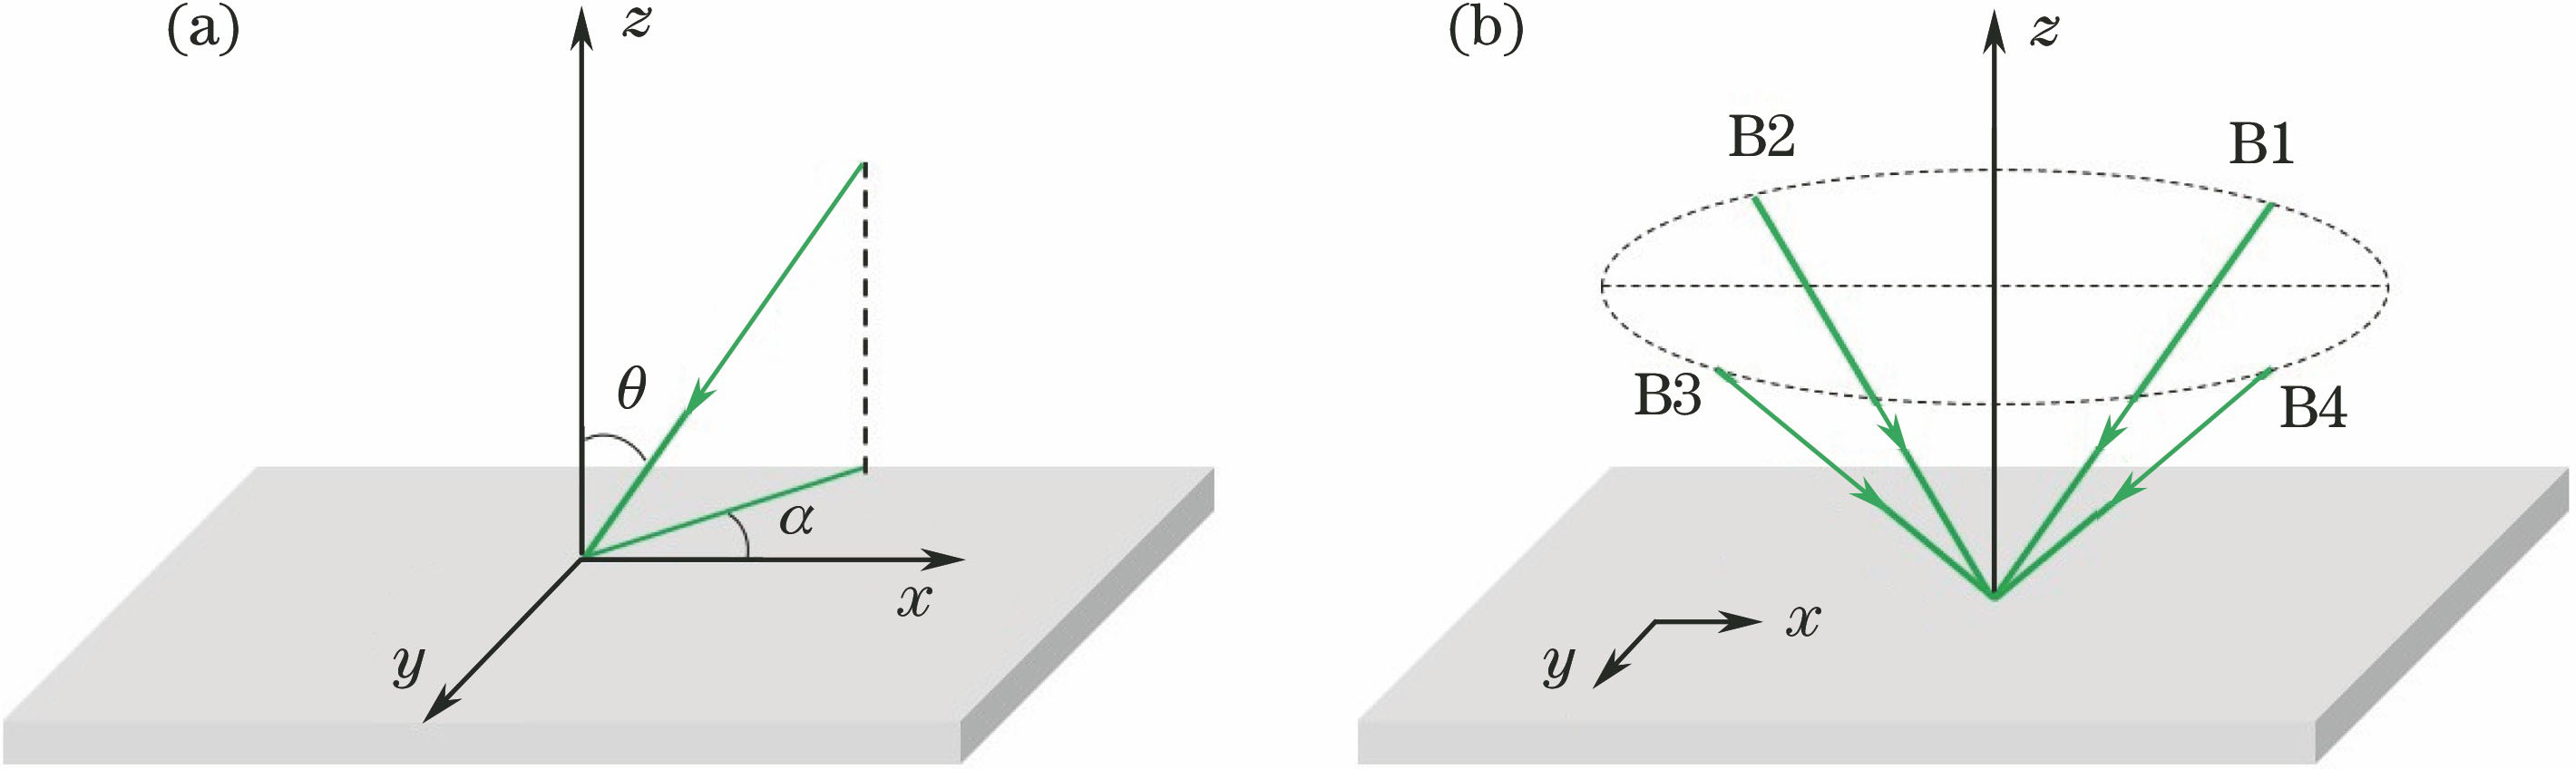 (a) Interference beam in rectangular coordinate system; (b) diagram of four beams (B1, B2, B3, B4) interference